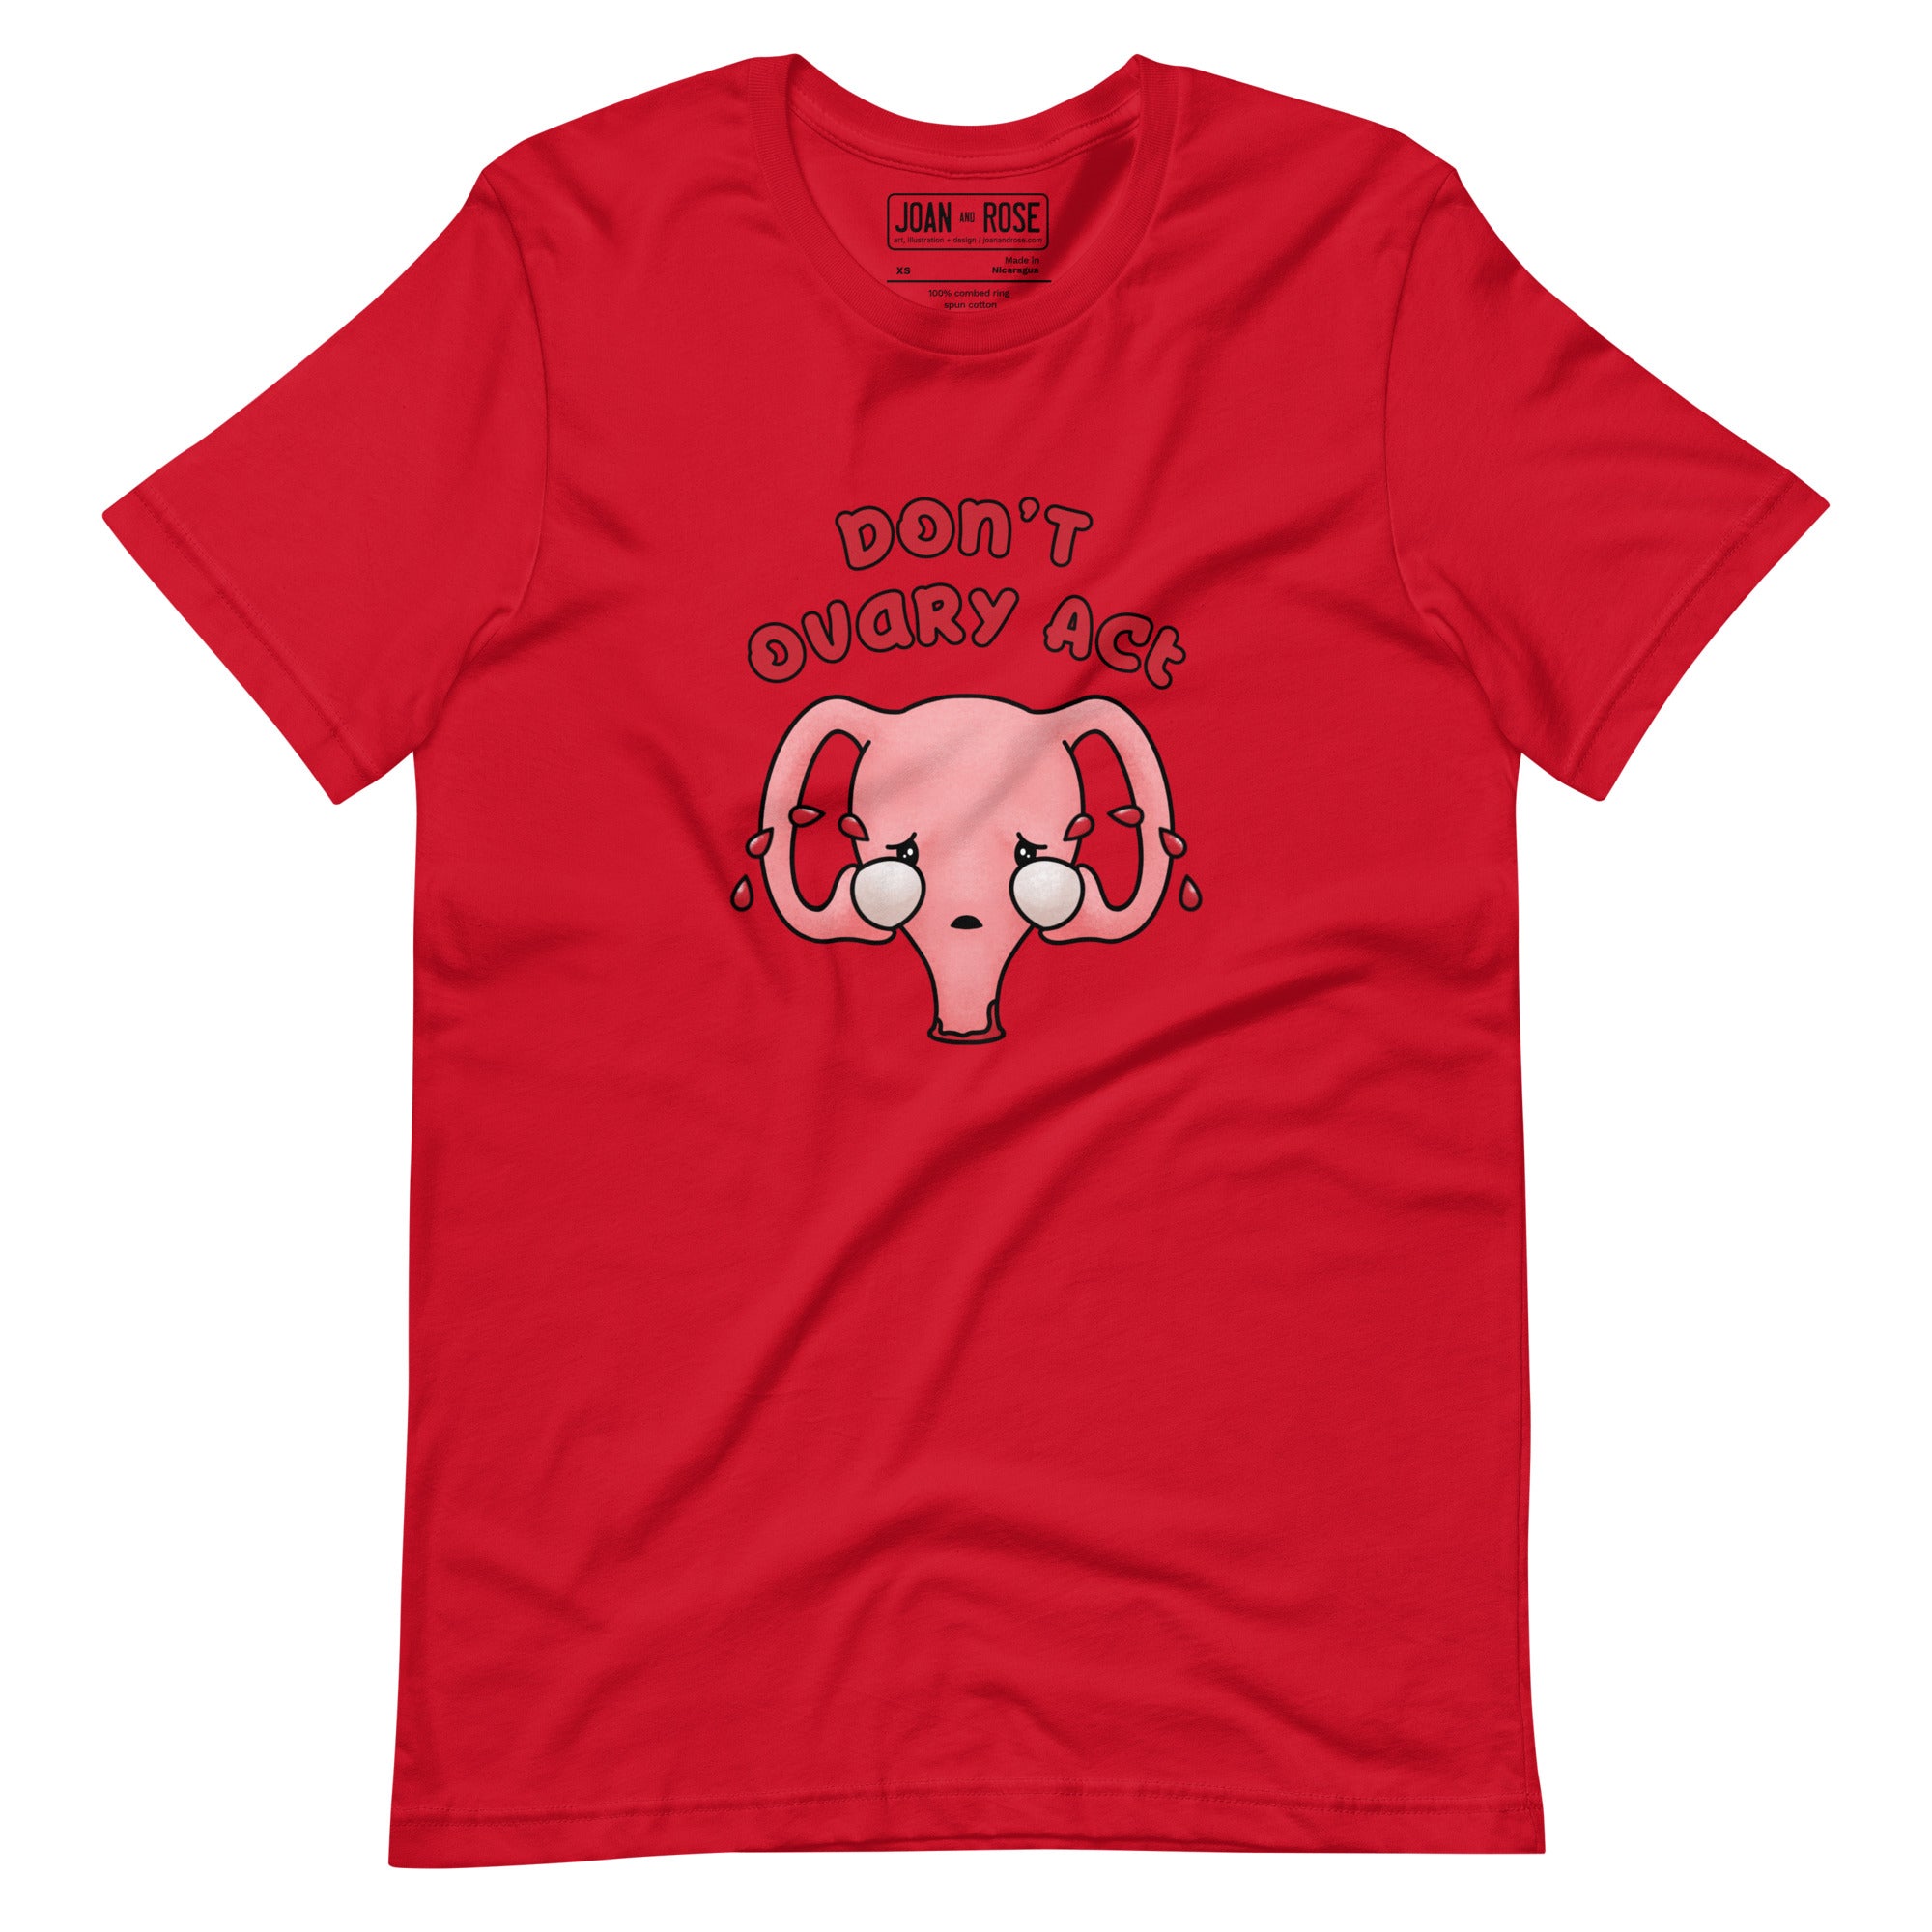 Red version of Don't Ovary Act t-shirt